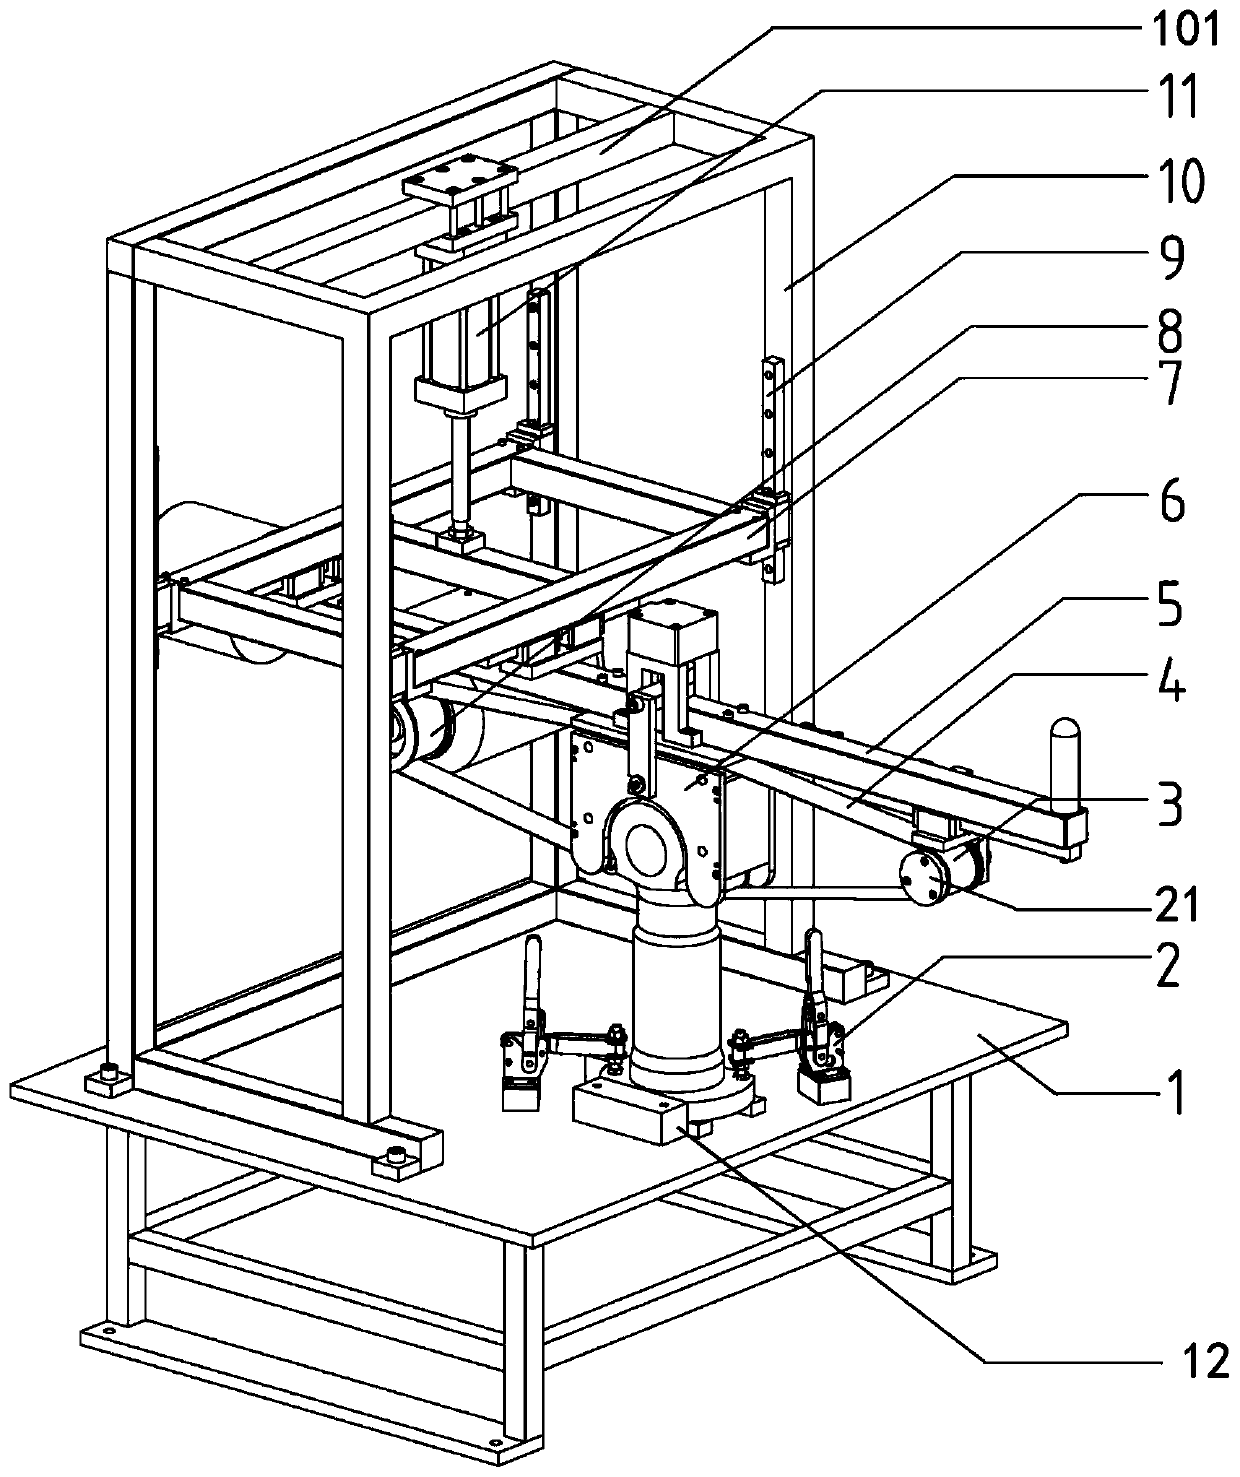 A device for polishing the circular arc surface of connecting rod